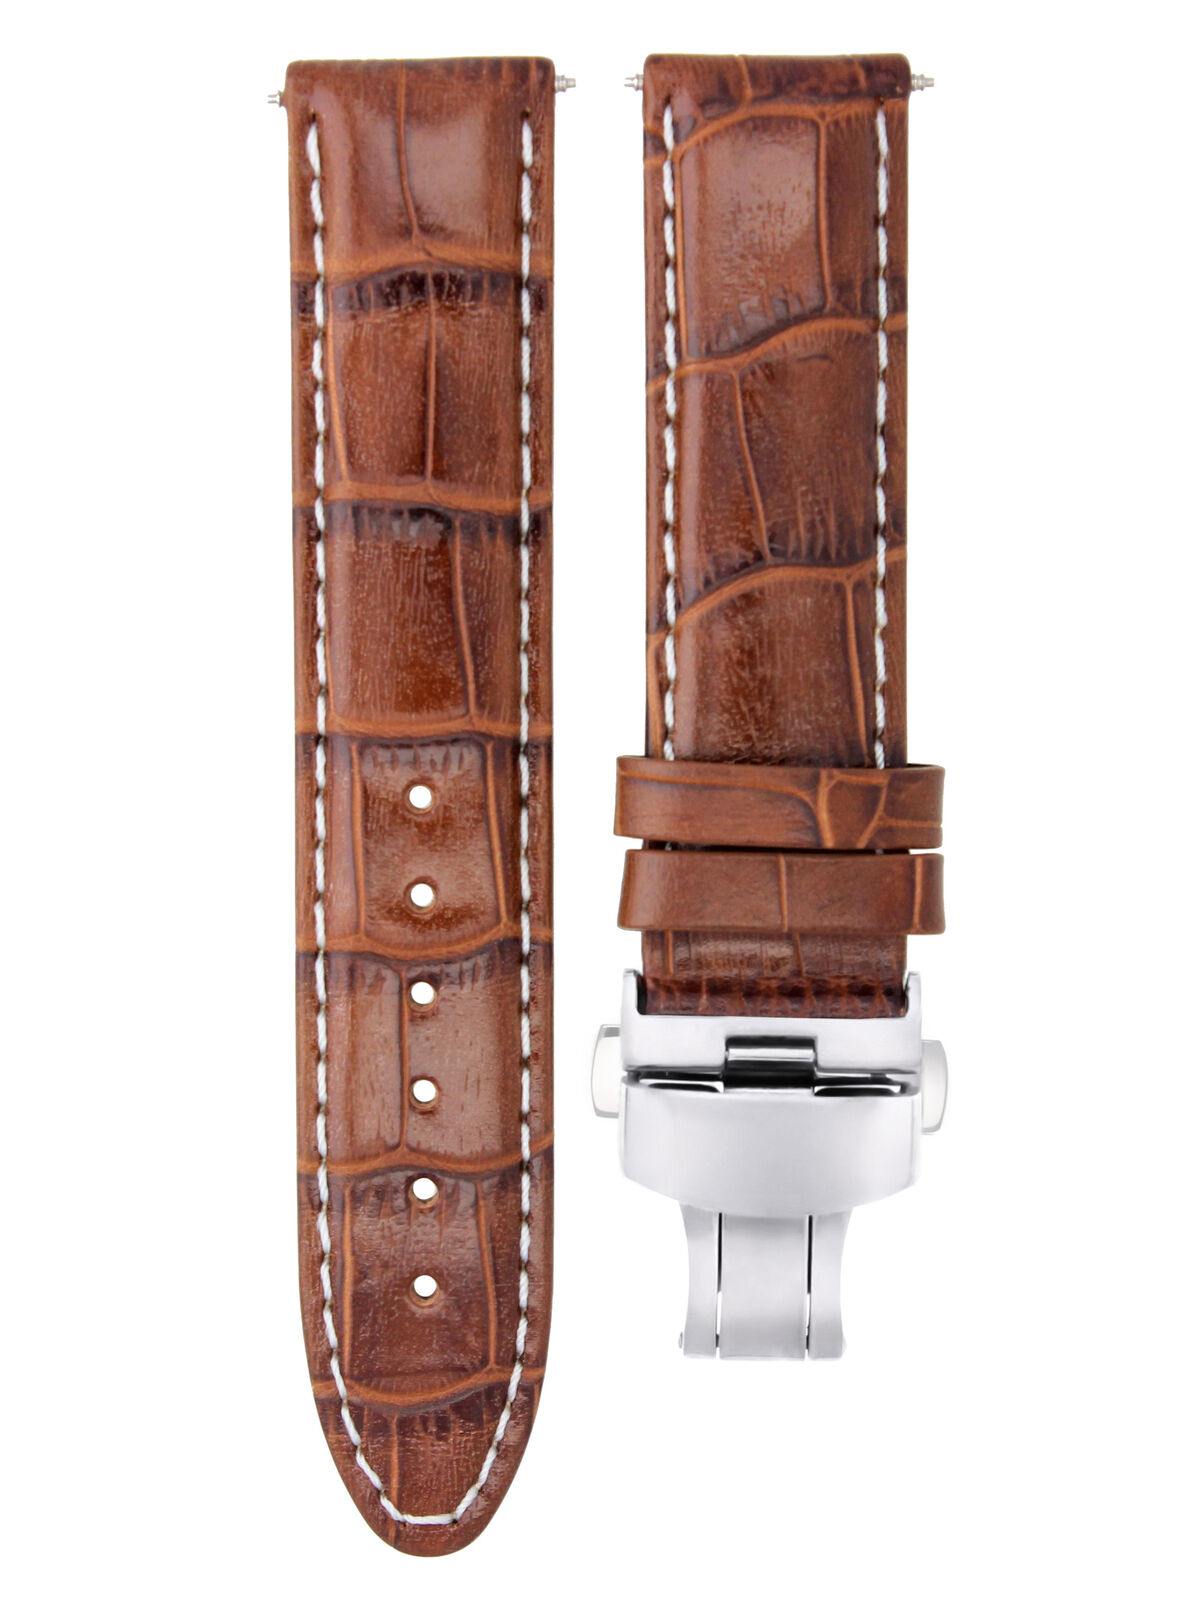 20MM PREMIUM LEATHER WATCH STRAP BAND FOR 36MM TUDOR WATCH CLASP LIGHT BROWN WS